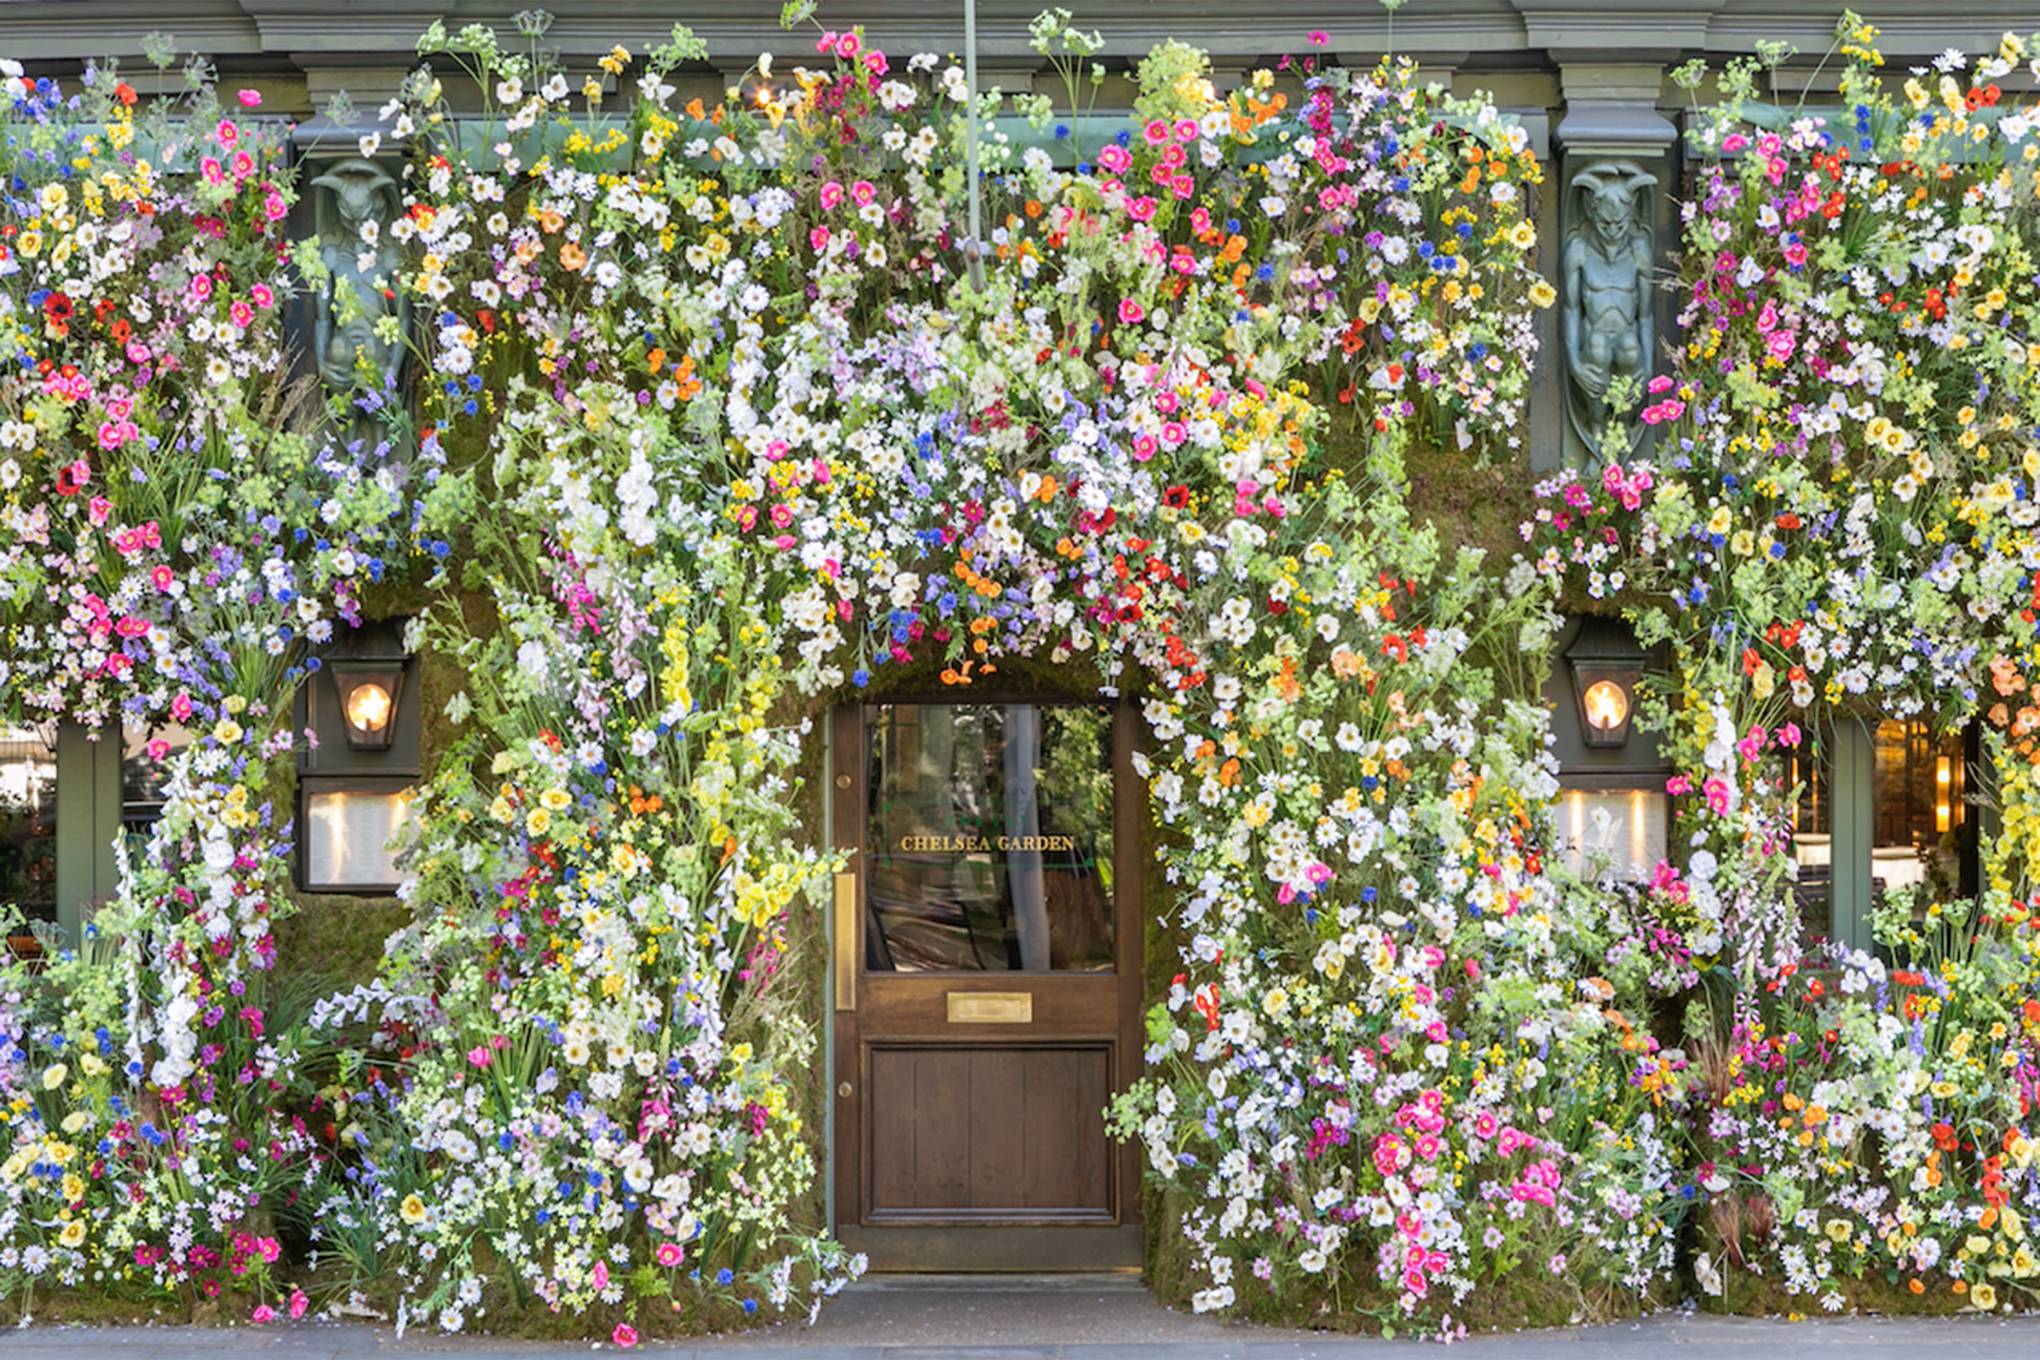 Pictures of the Chelsea Flower Show 2019 | CN Traveller